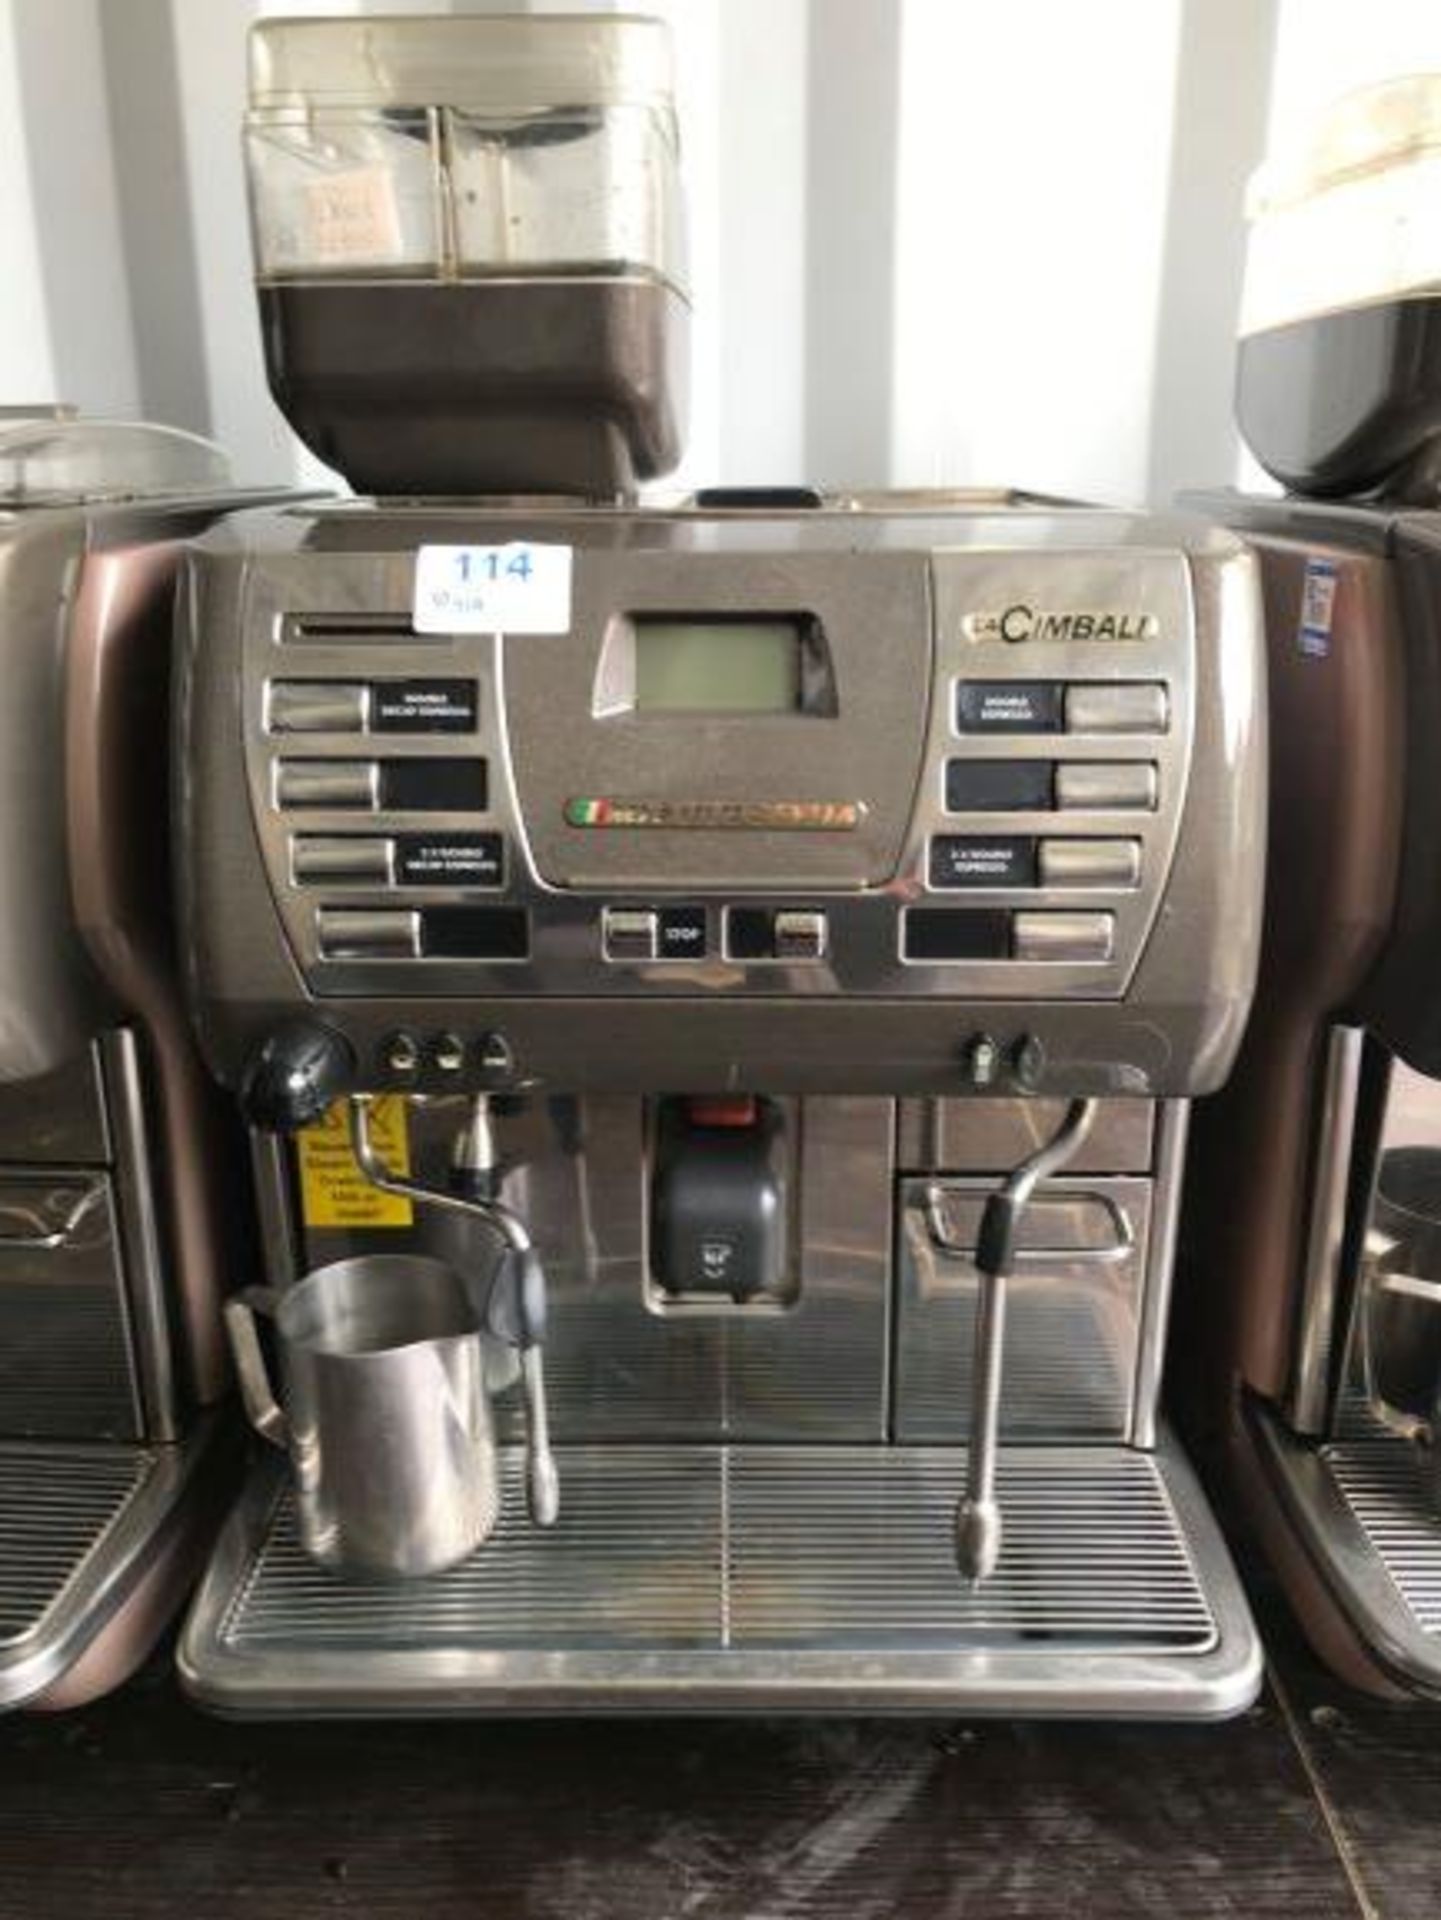 La Cimbali M53 Dolcevita Automatic Commercial Coffee Machine - Image 4 of 4